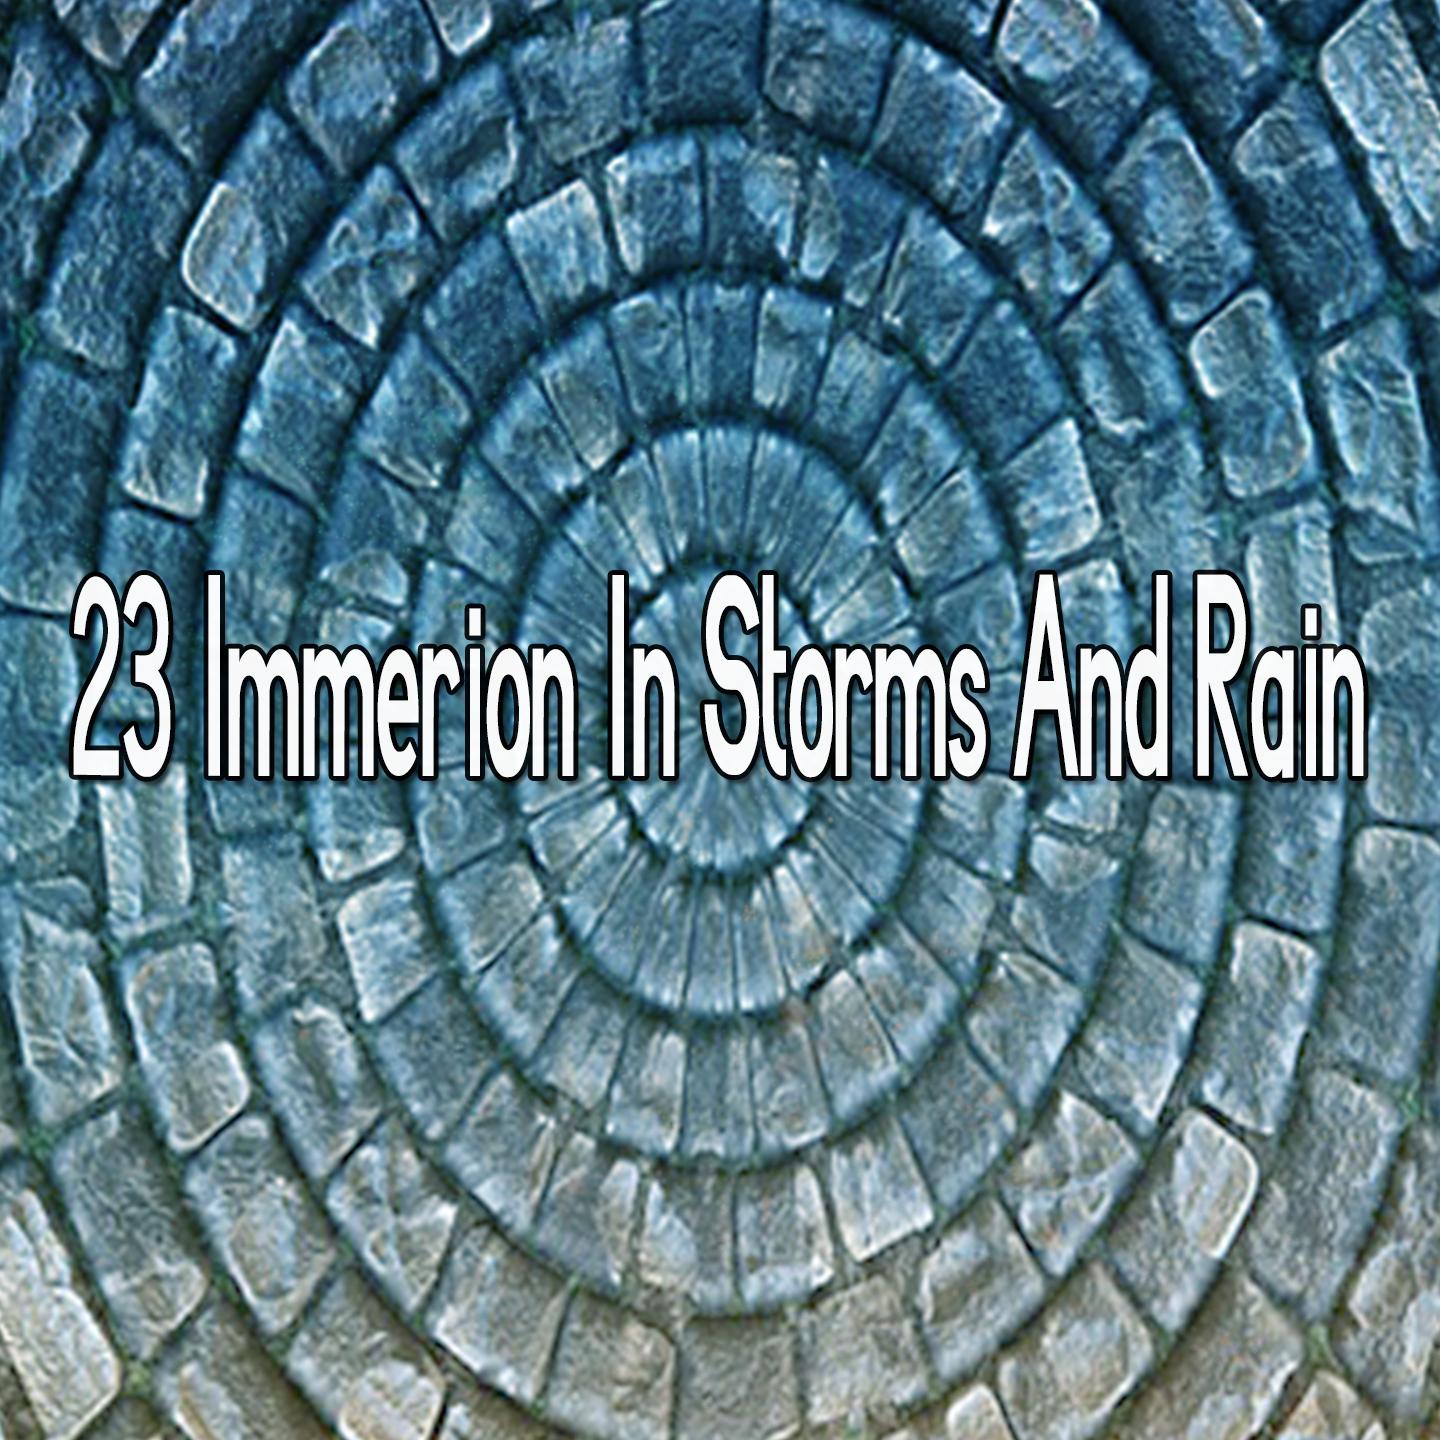 23 Immerion in Storms and Rain